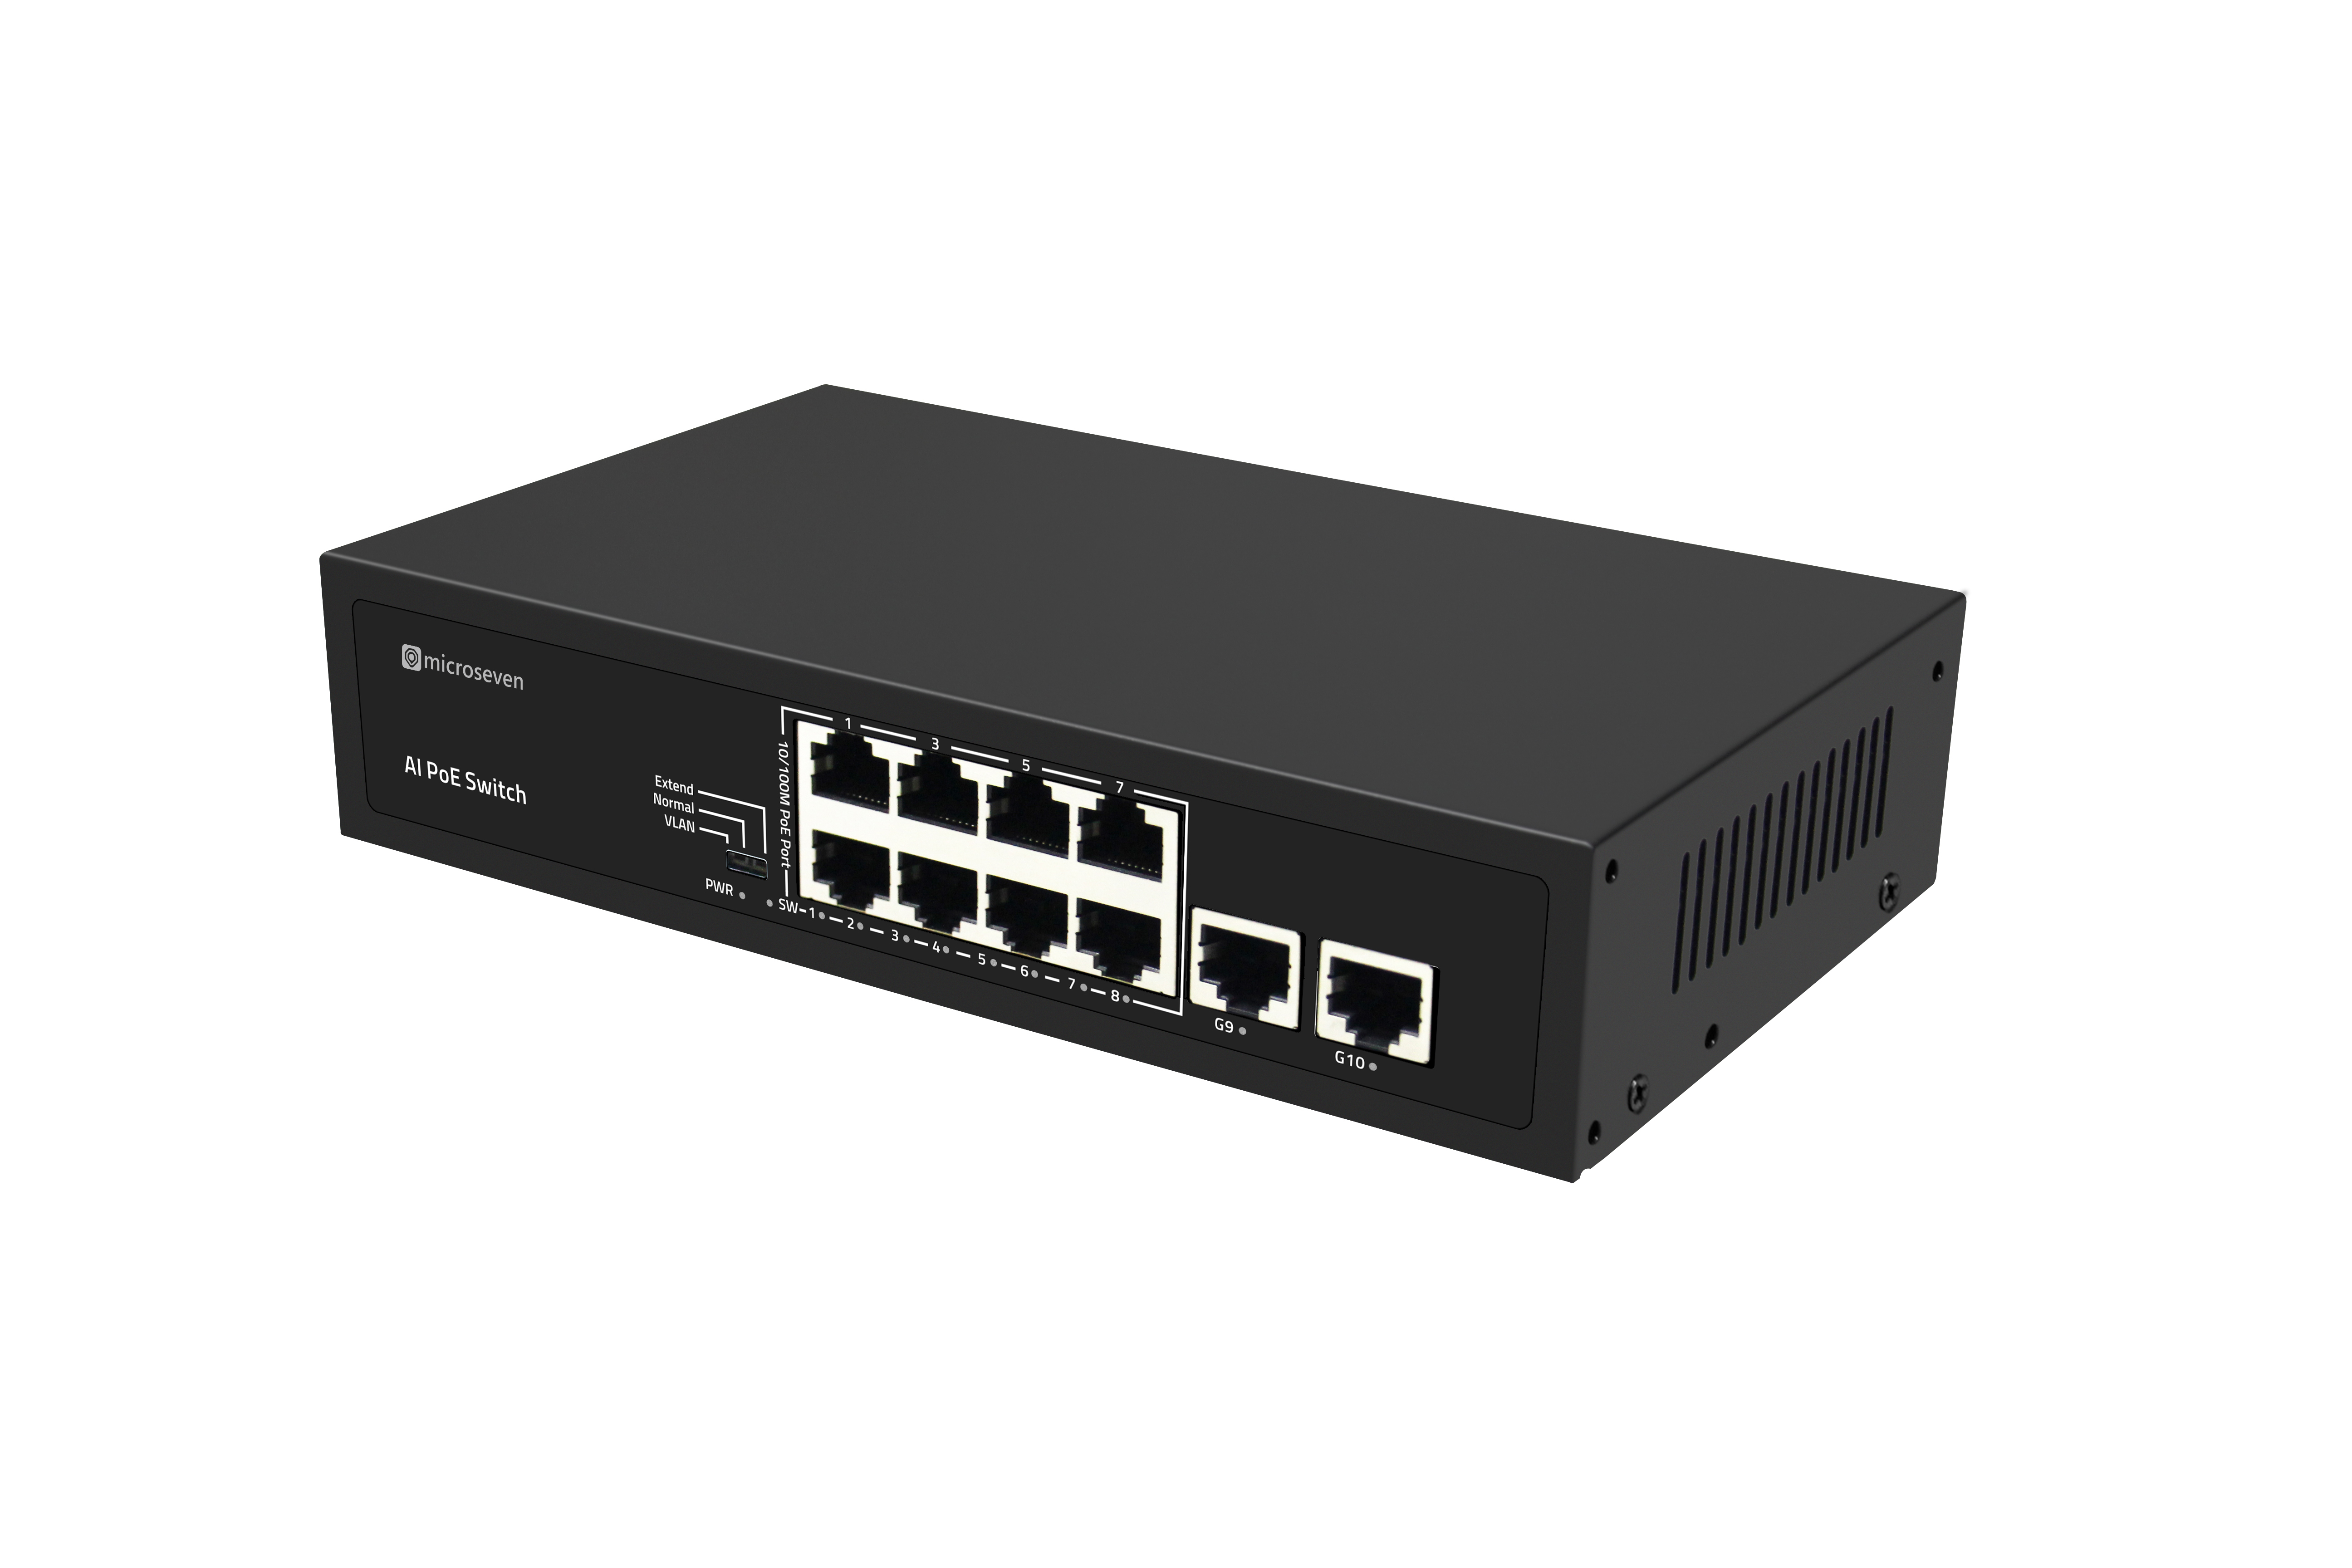 Microseven AI PoE Switch (8 POE Ports +2 Uplink), 802.3af/at PoE+ 100Mbps, 120W Built-in Power, Extend to 250Meter,Unmanaged Metal Plug and Play